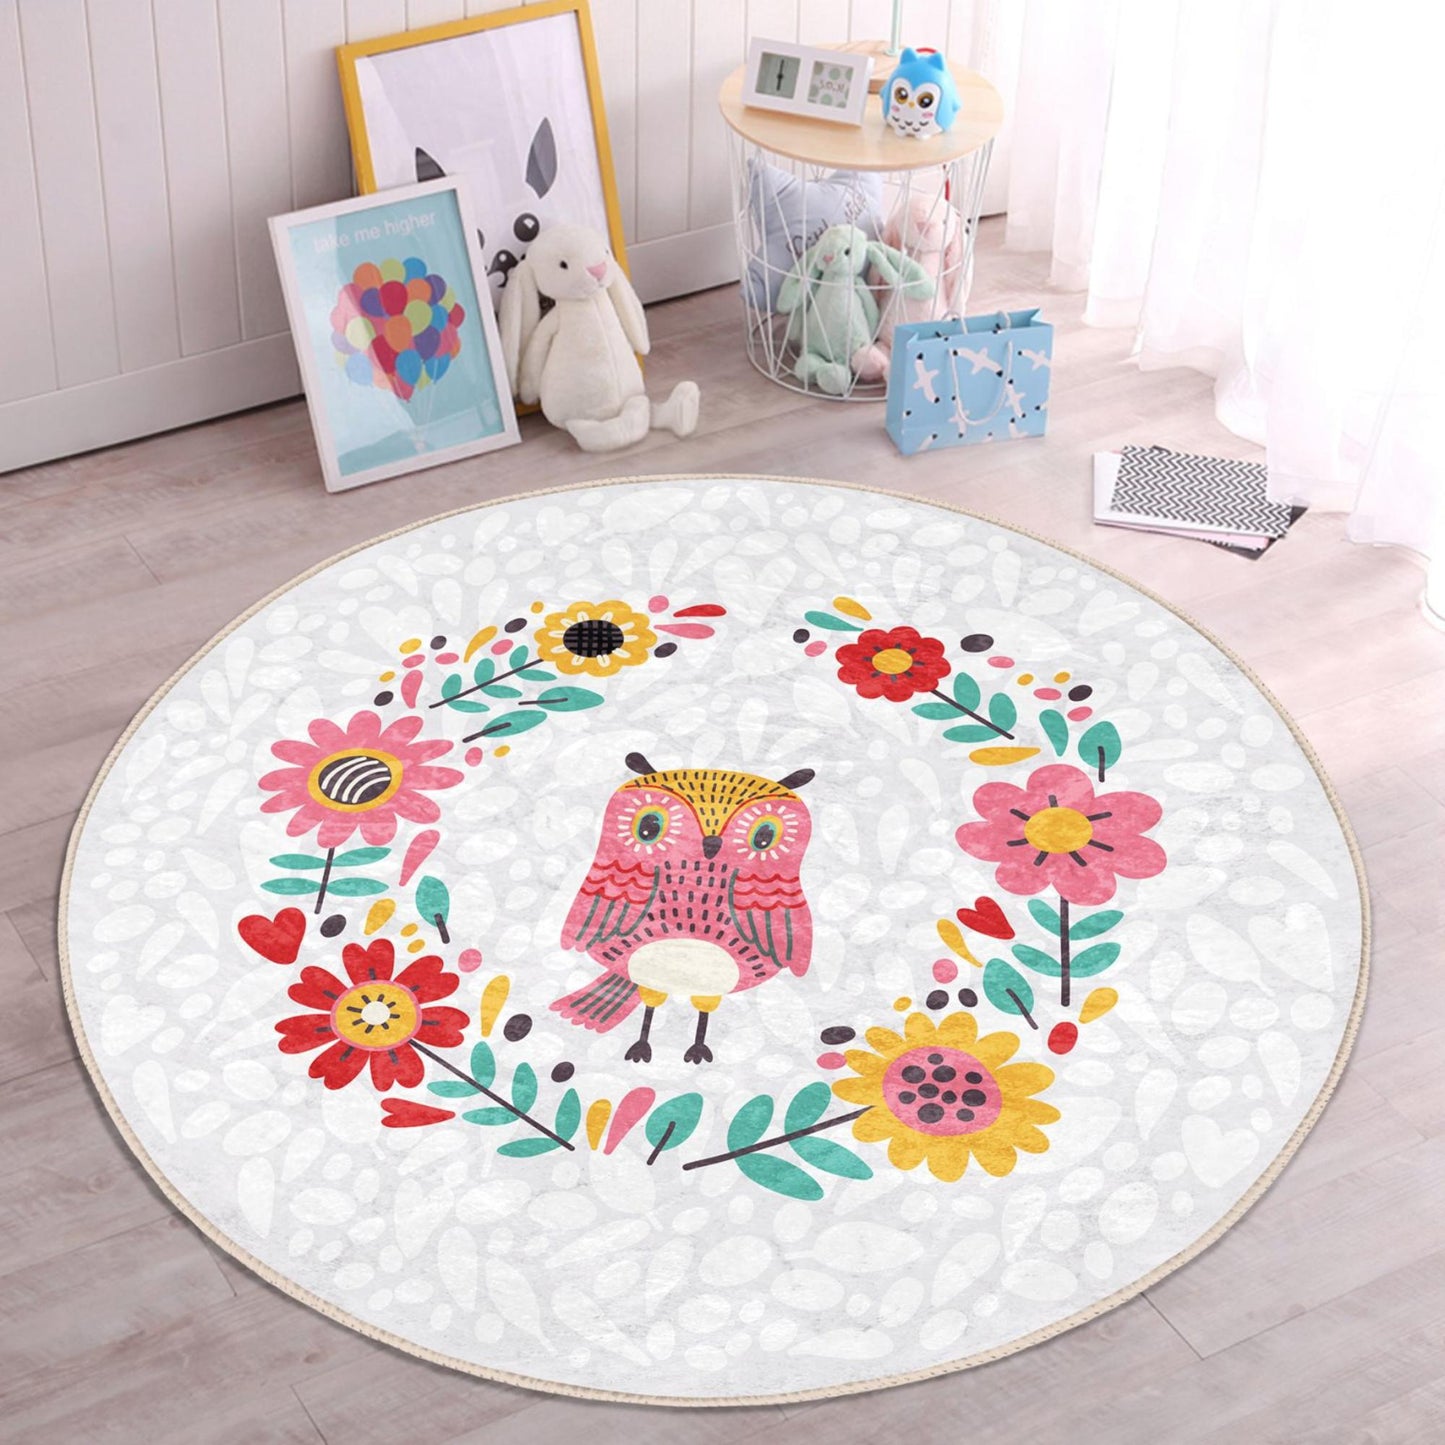 Soft and cozy rug adorned with floral patterns for children's rooms.